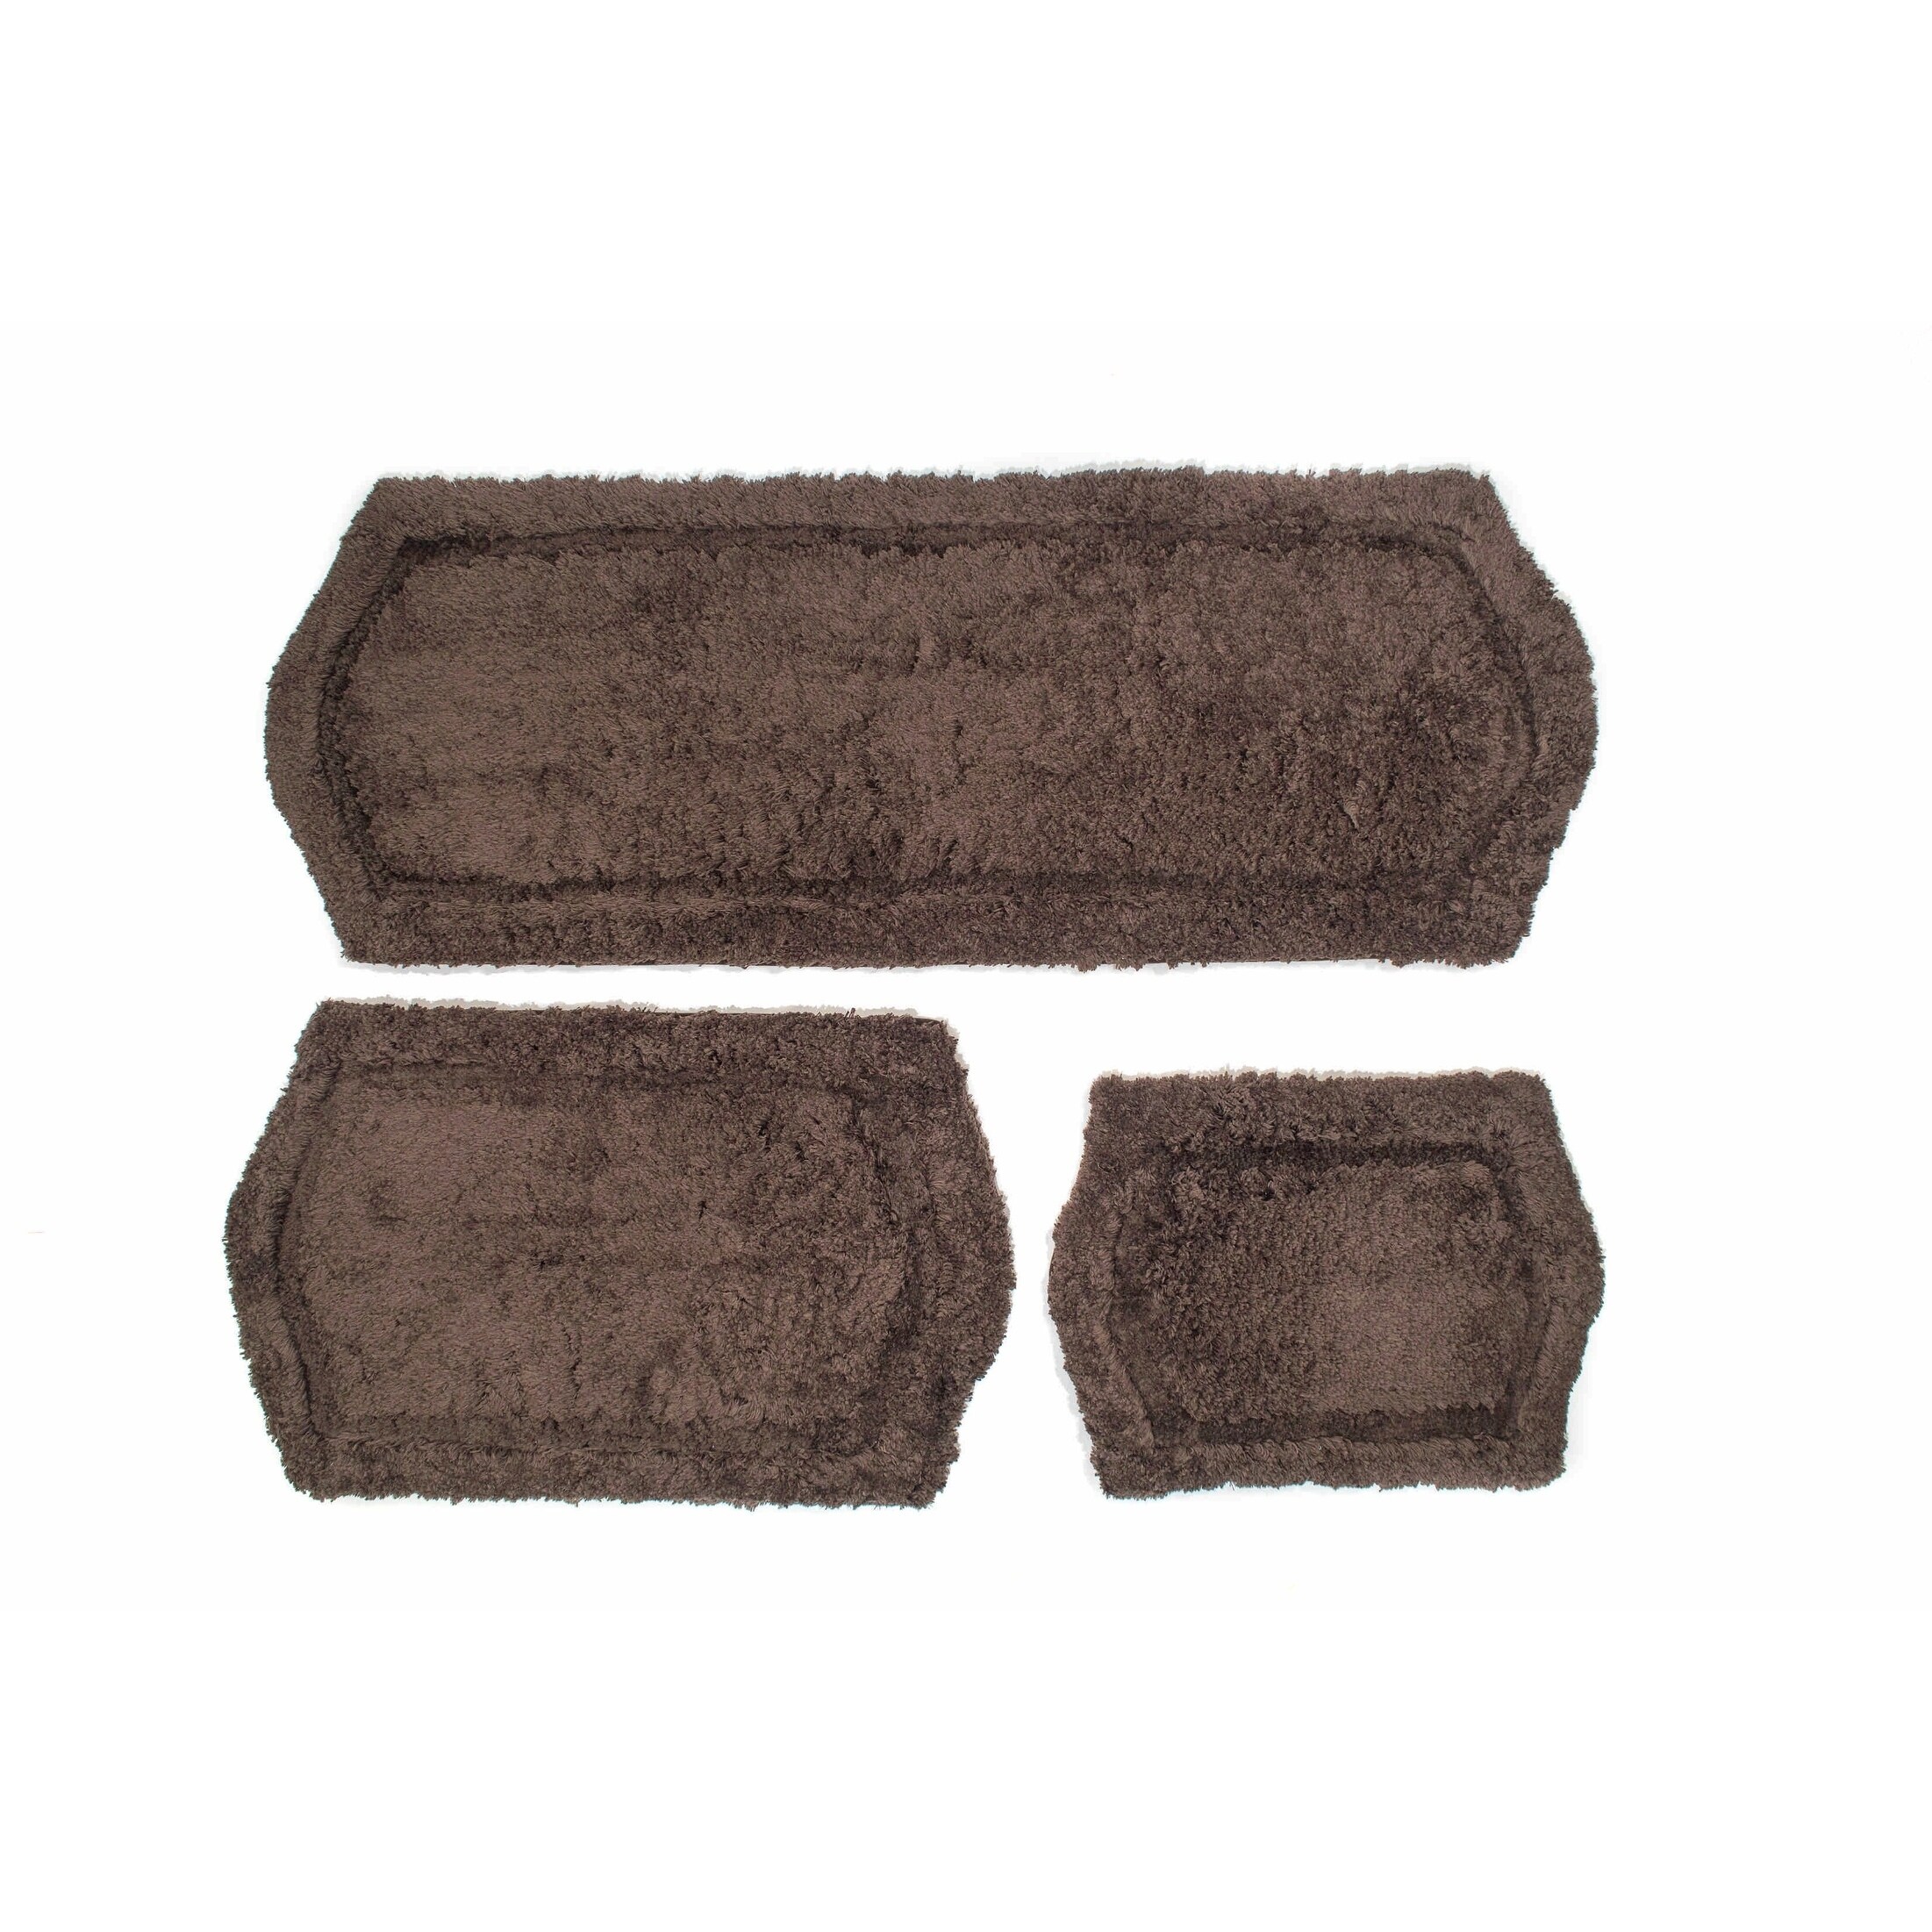 Chesapeake Merchandising Inc Chesapeake Paradise Memory Foam Black 3-Pieces Bath Rug Set (22 in. x 60 in. and 21 in. x 34 in. and 17 in. x 24 in. )